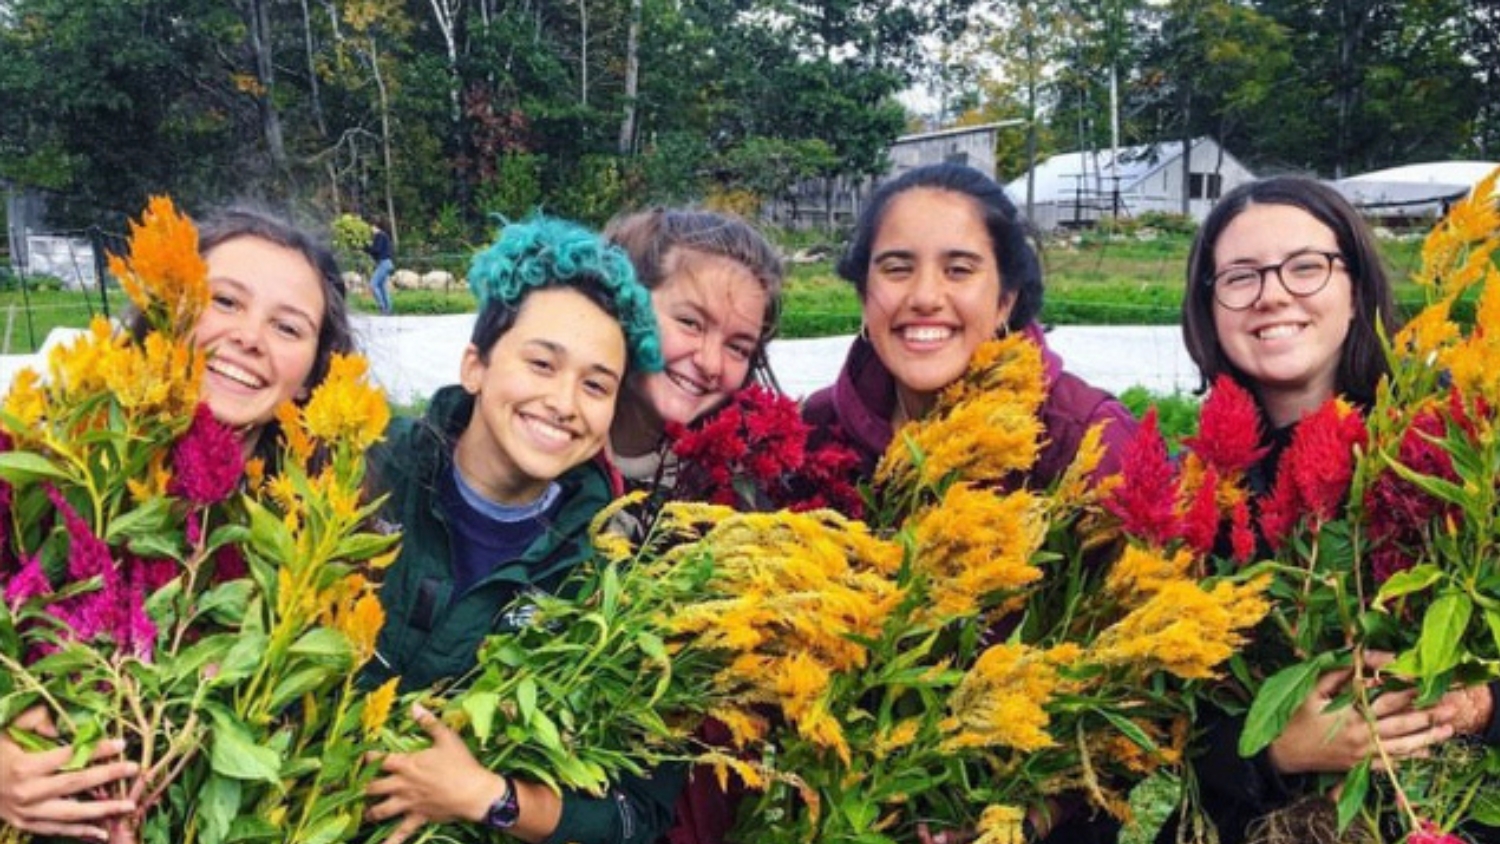 Evelyn McAdam with friends and flowers at the Maine Coast Semester School. 